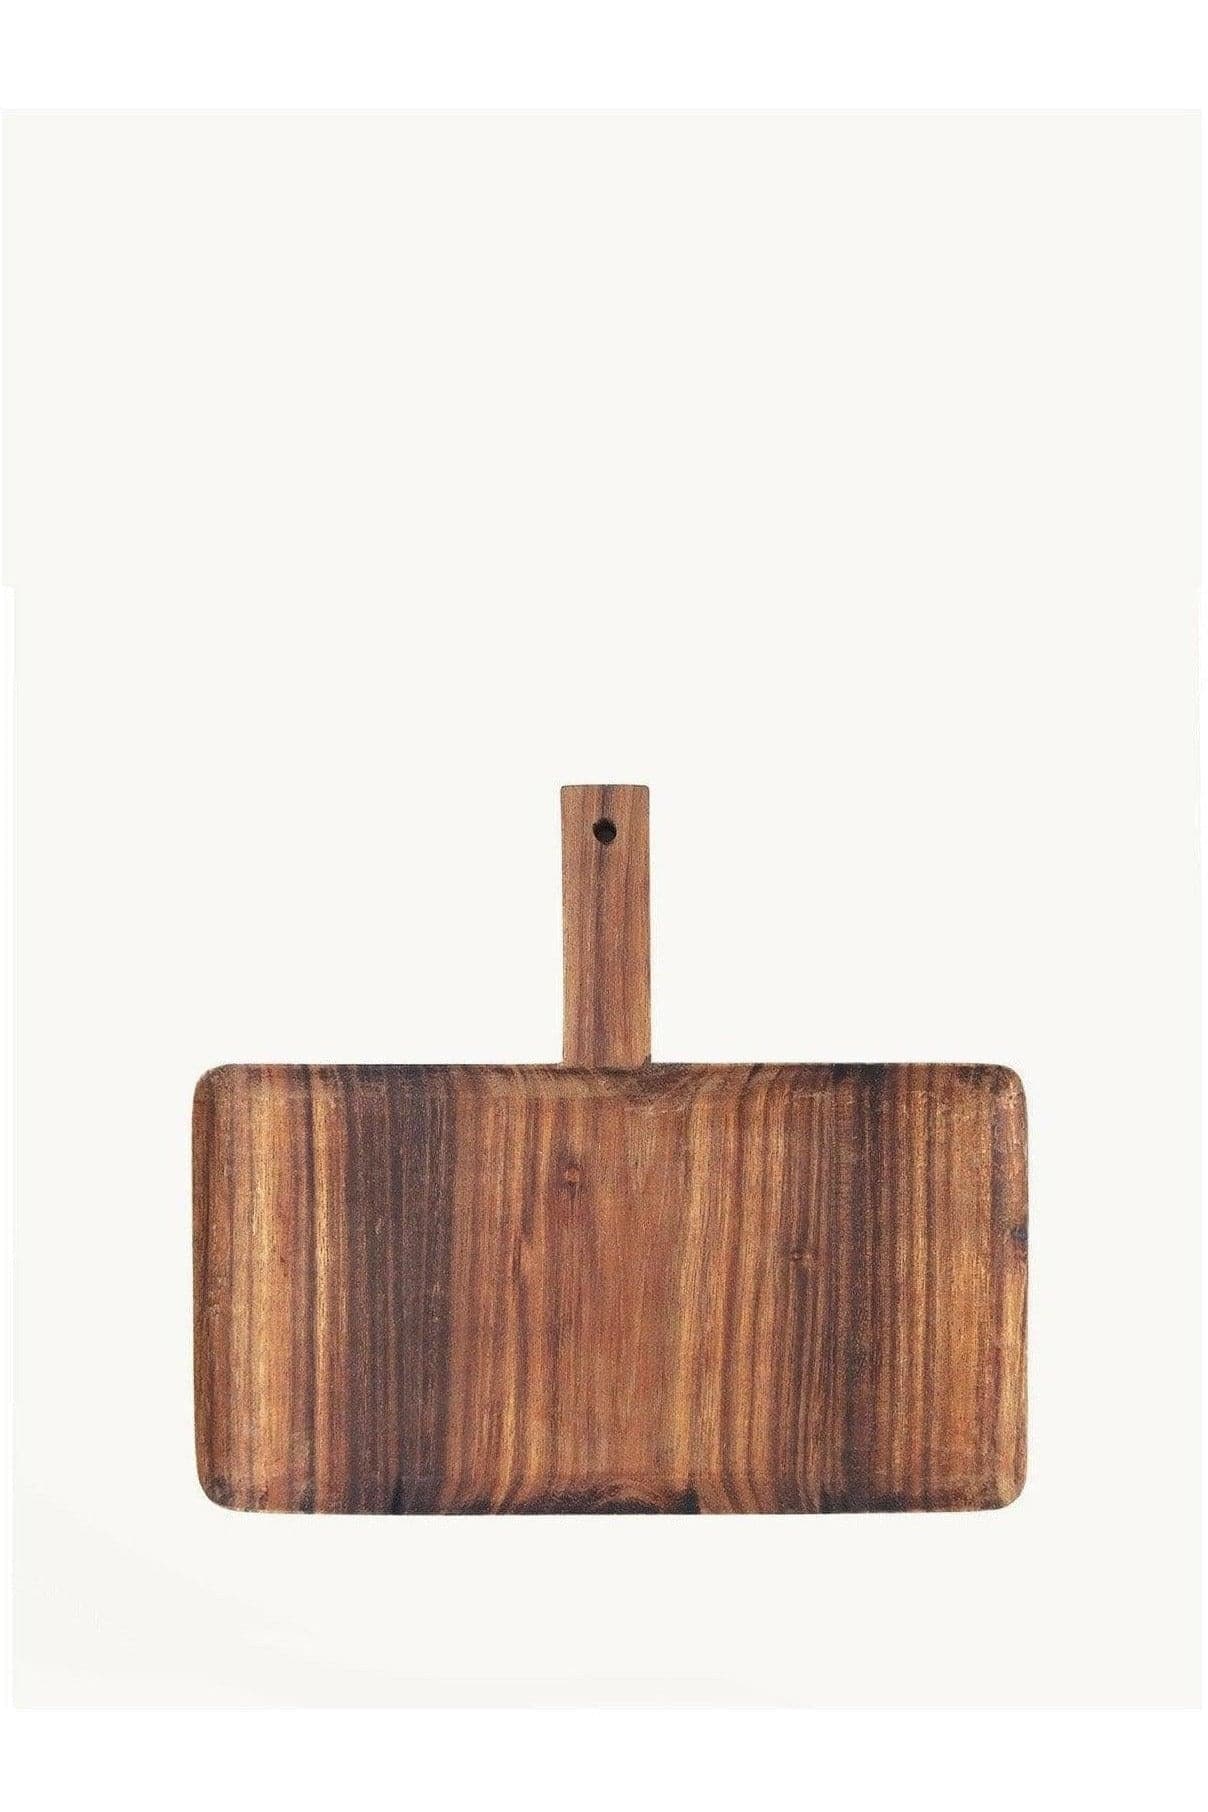 KORISSA Wooden Serving Tray - SwagglyLife Home & Fashion